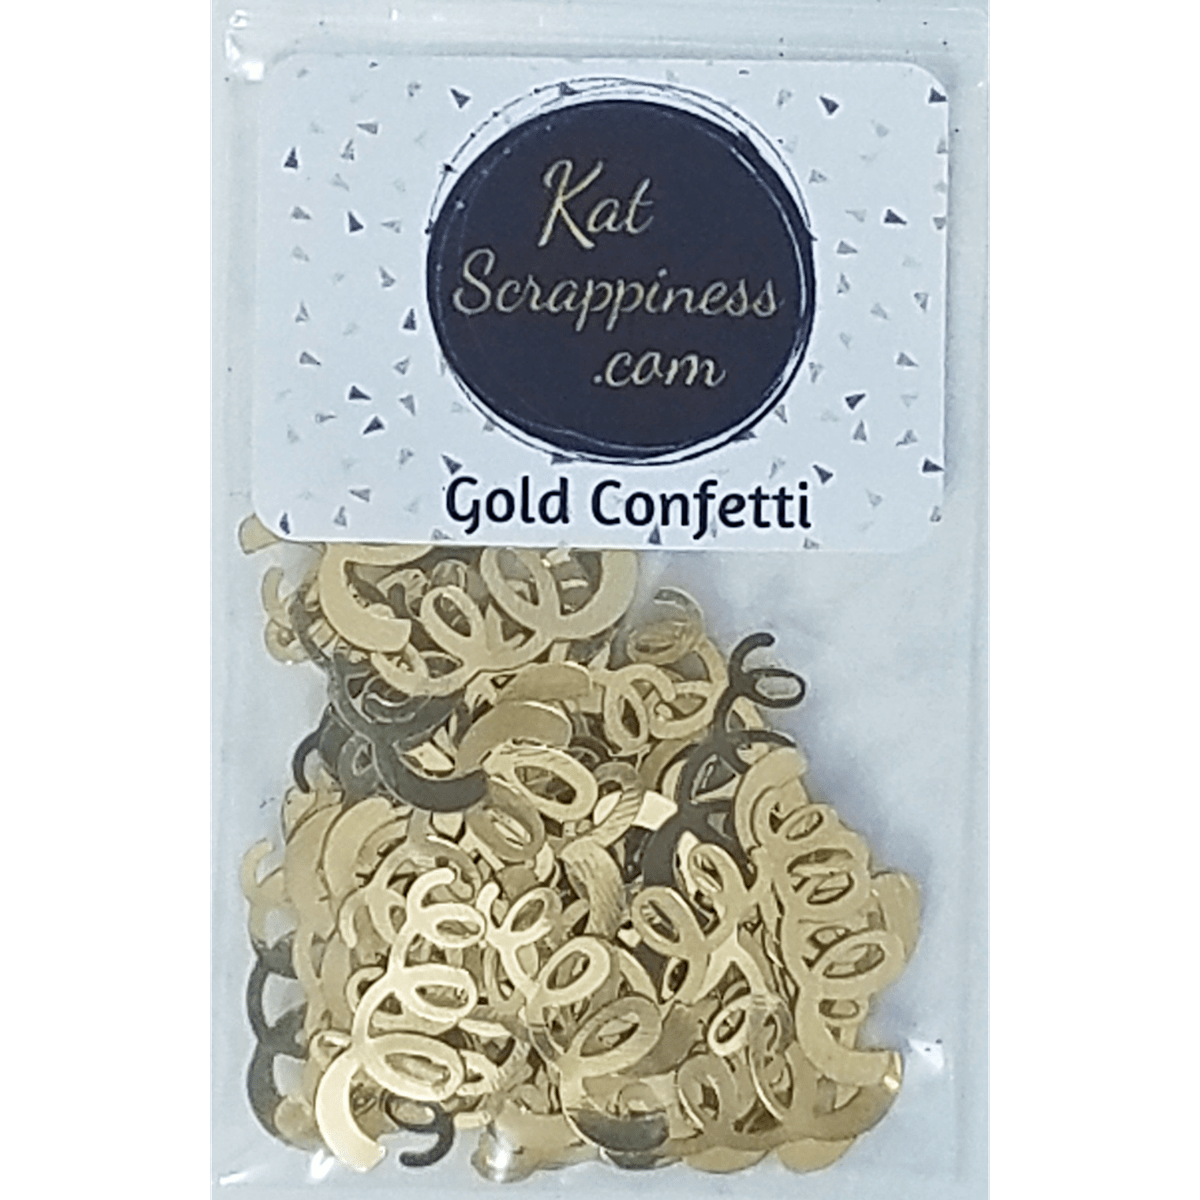 Gold Confetti Sequins - Kat Scrappiness